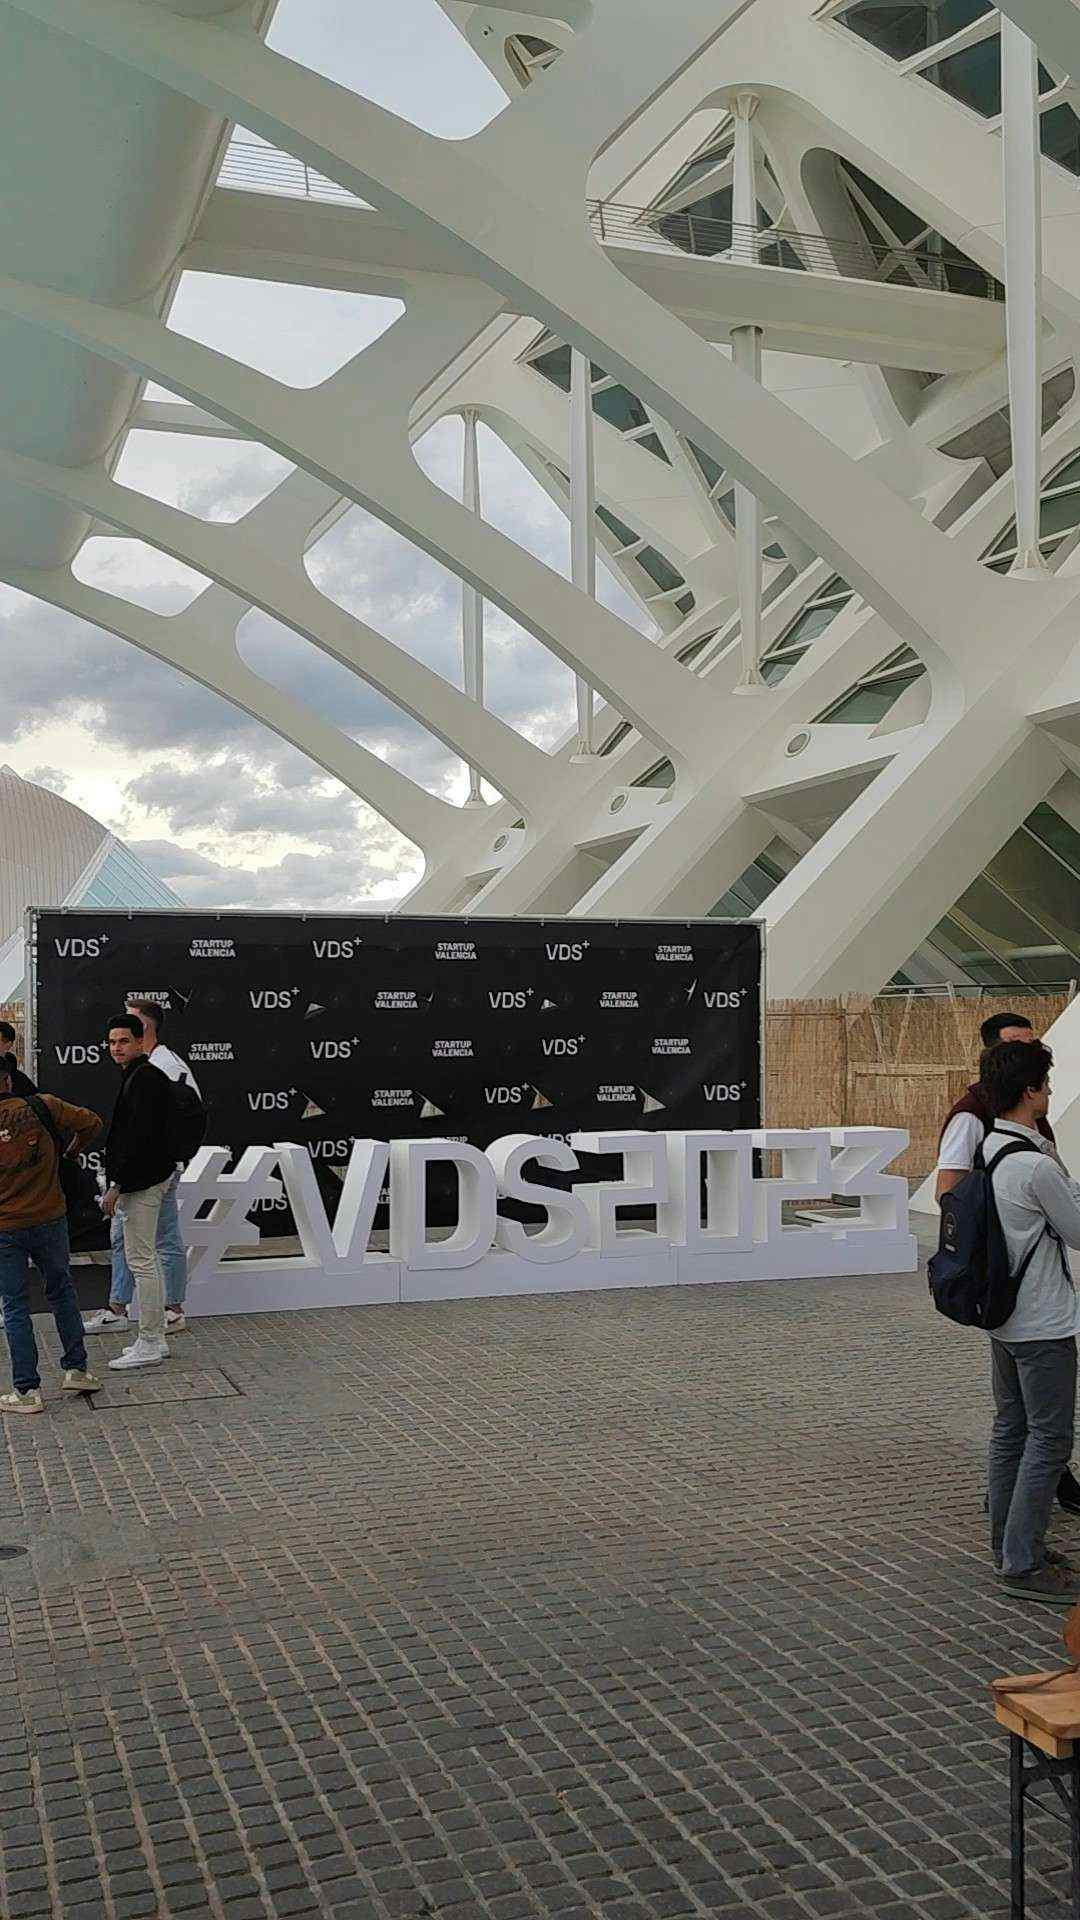 Image from Valencia Digital Summit event